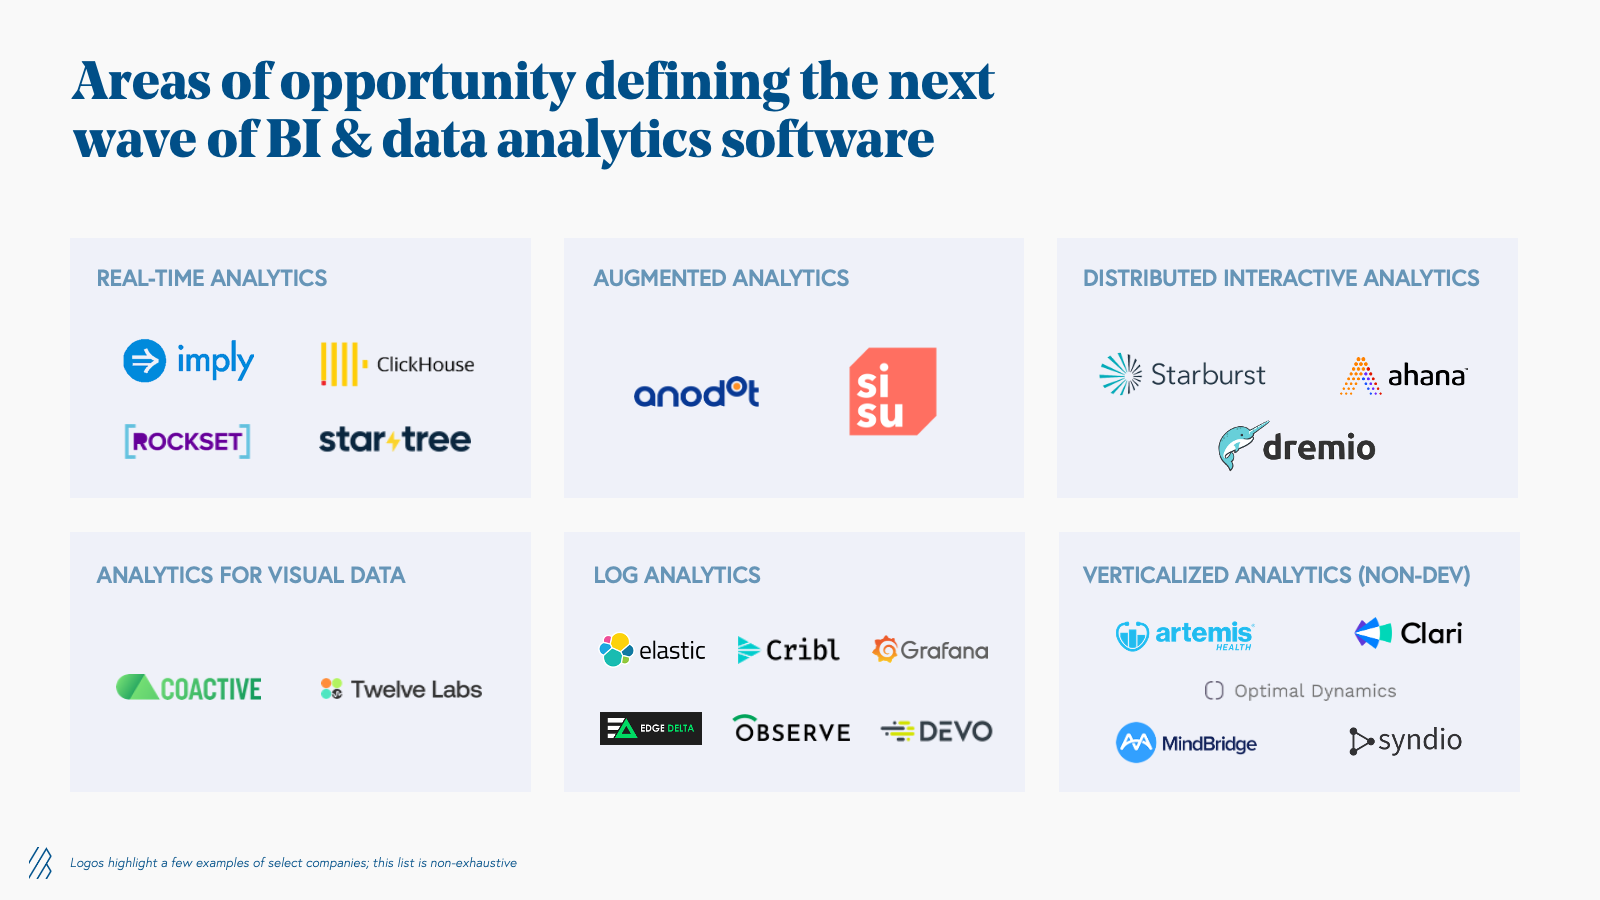 Areas of opportunity defining the next wave of BI and data analytics software